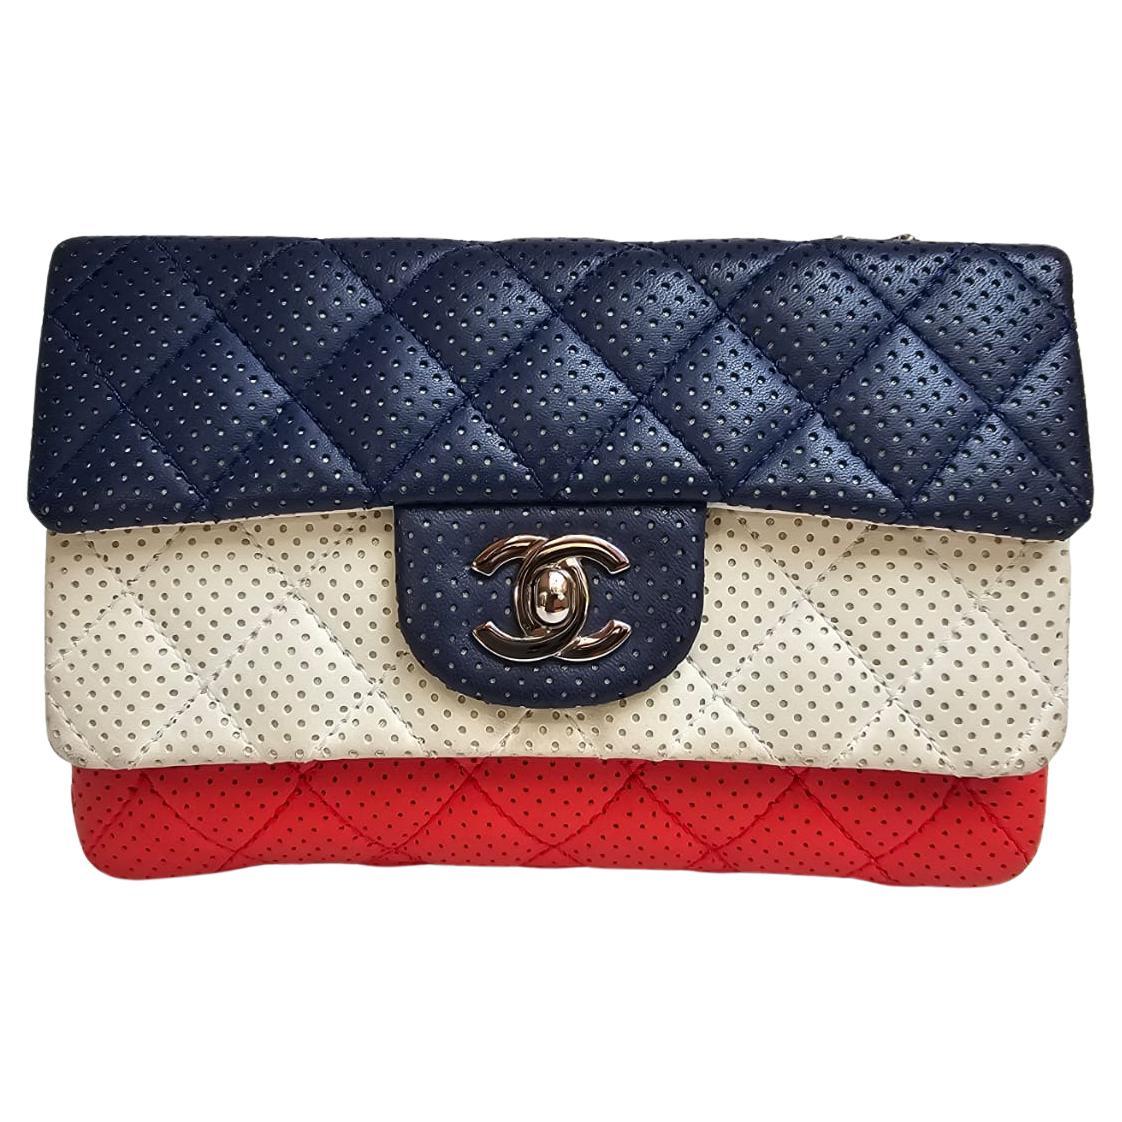 Chanel Tricolor Perforated Mini Rectangle Flap Bag For Sale